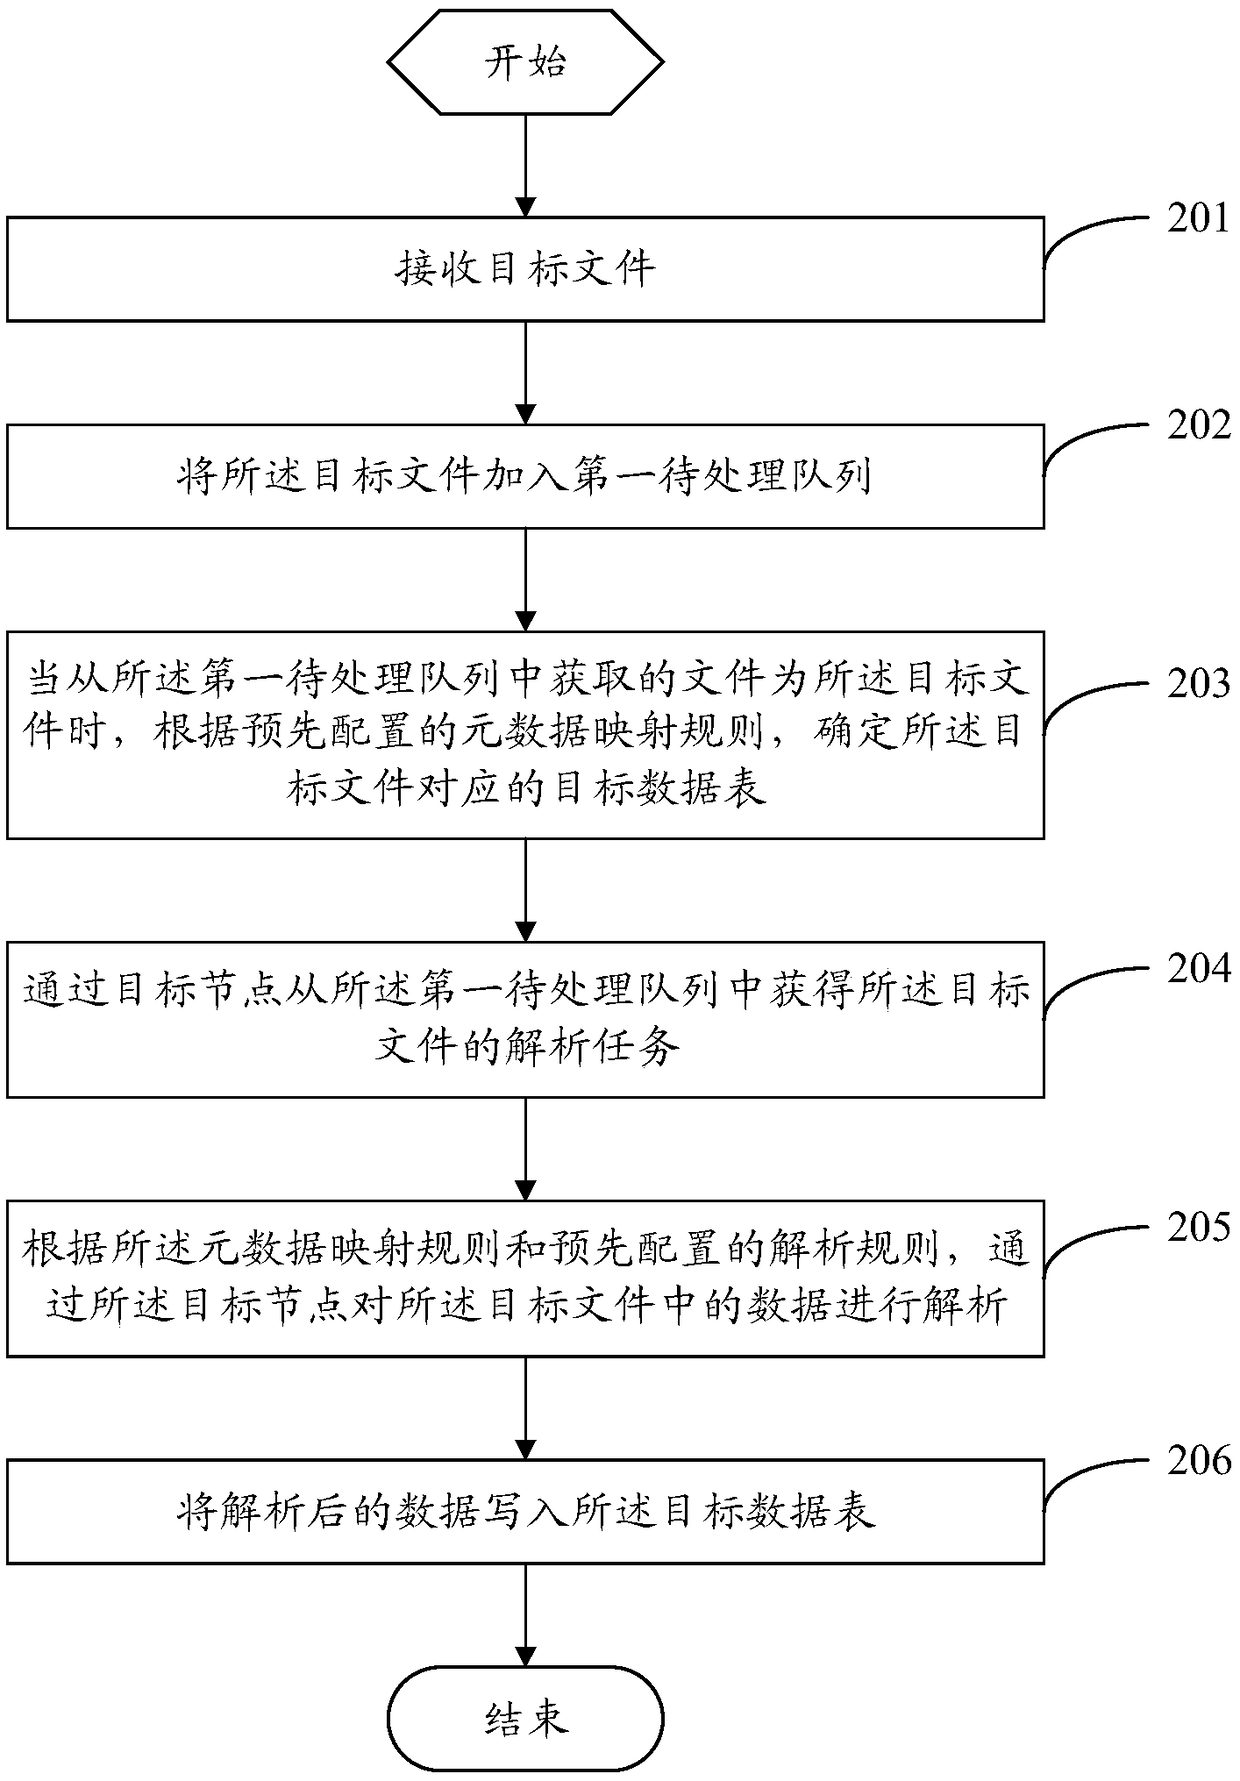 A data processing method and system